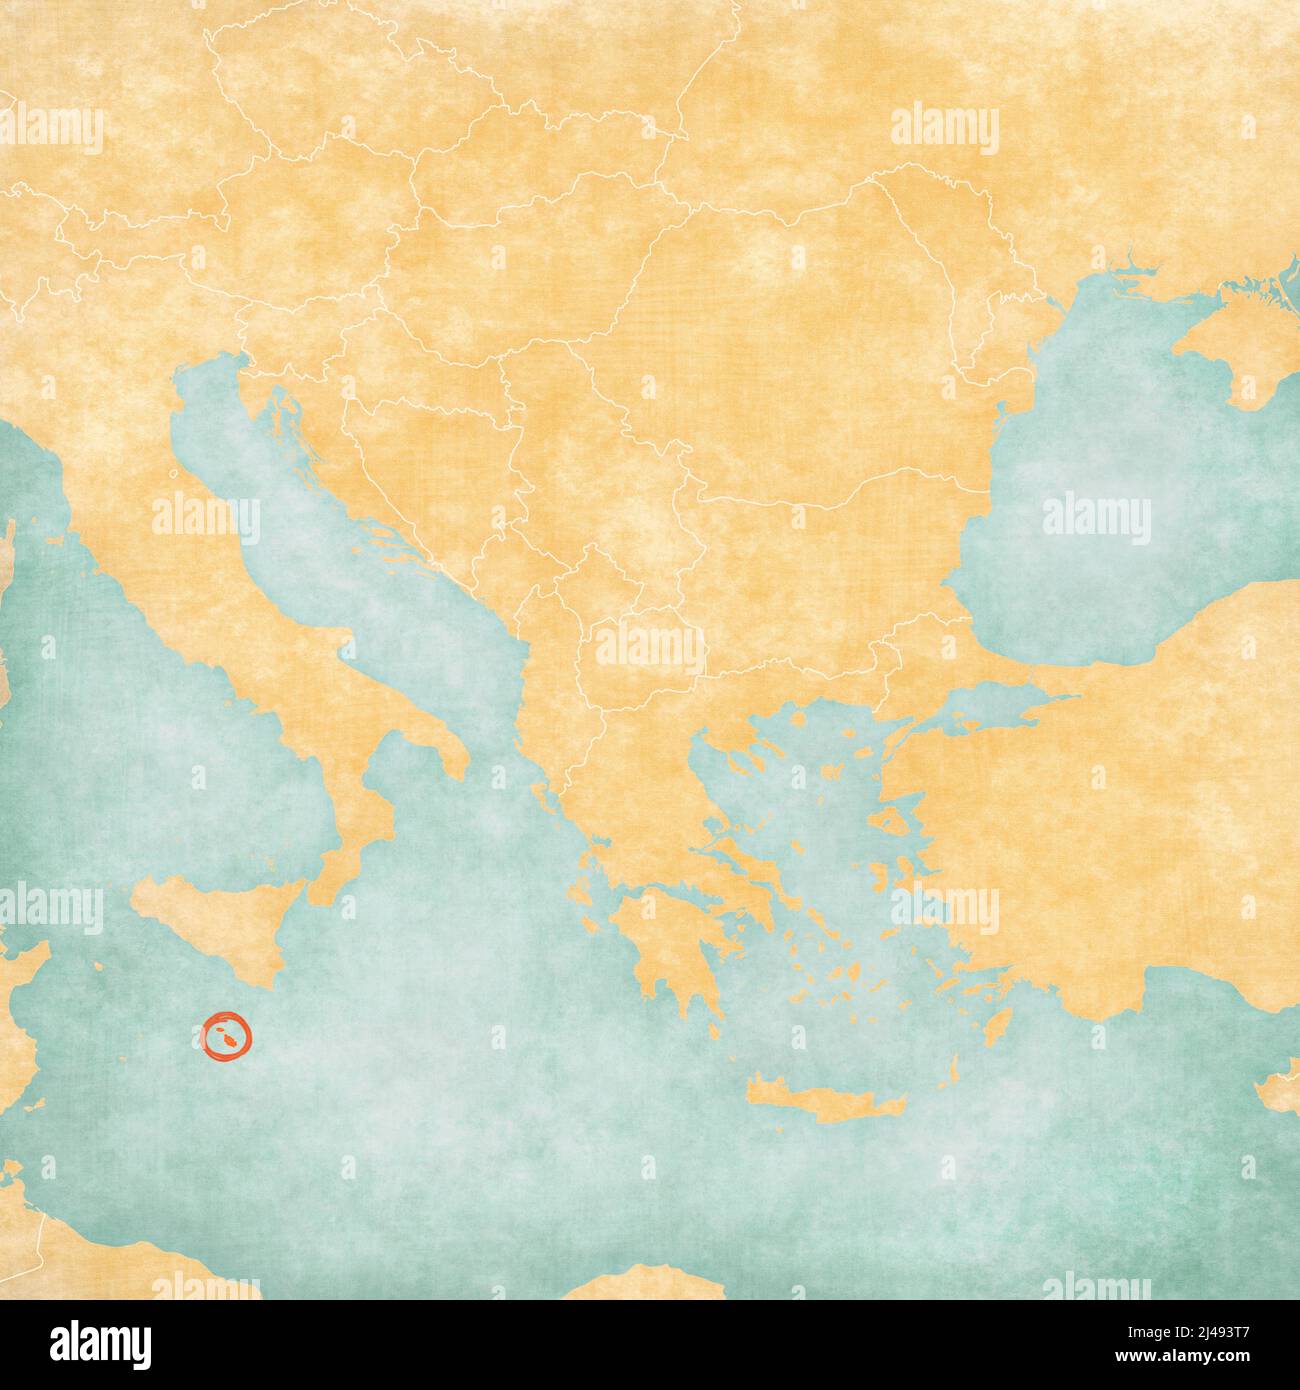 Malta on the map of Balkans in soft grunge and vintage style, like old paper with watercolor painting. Stock Photo